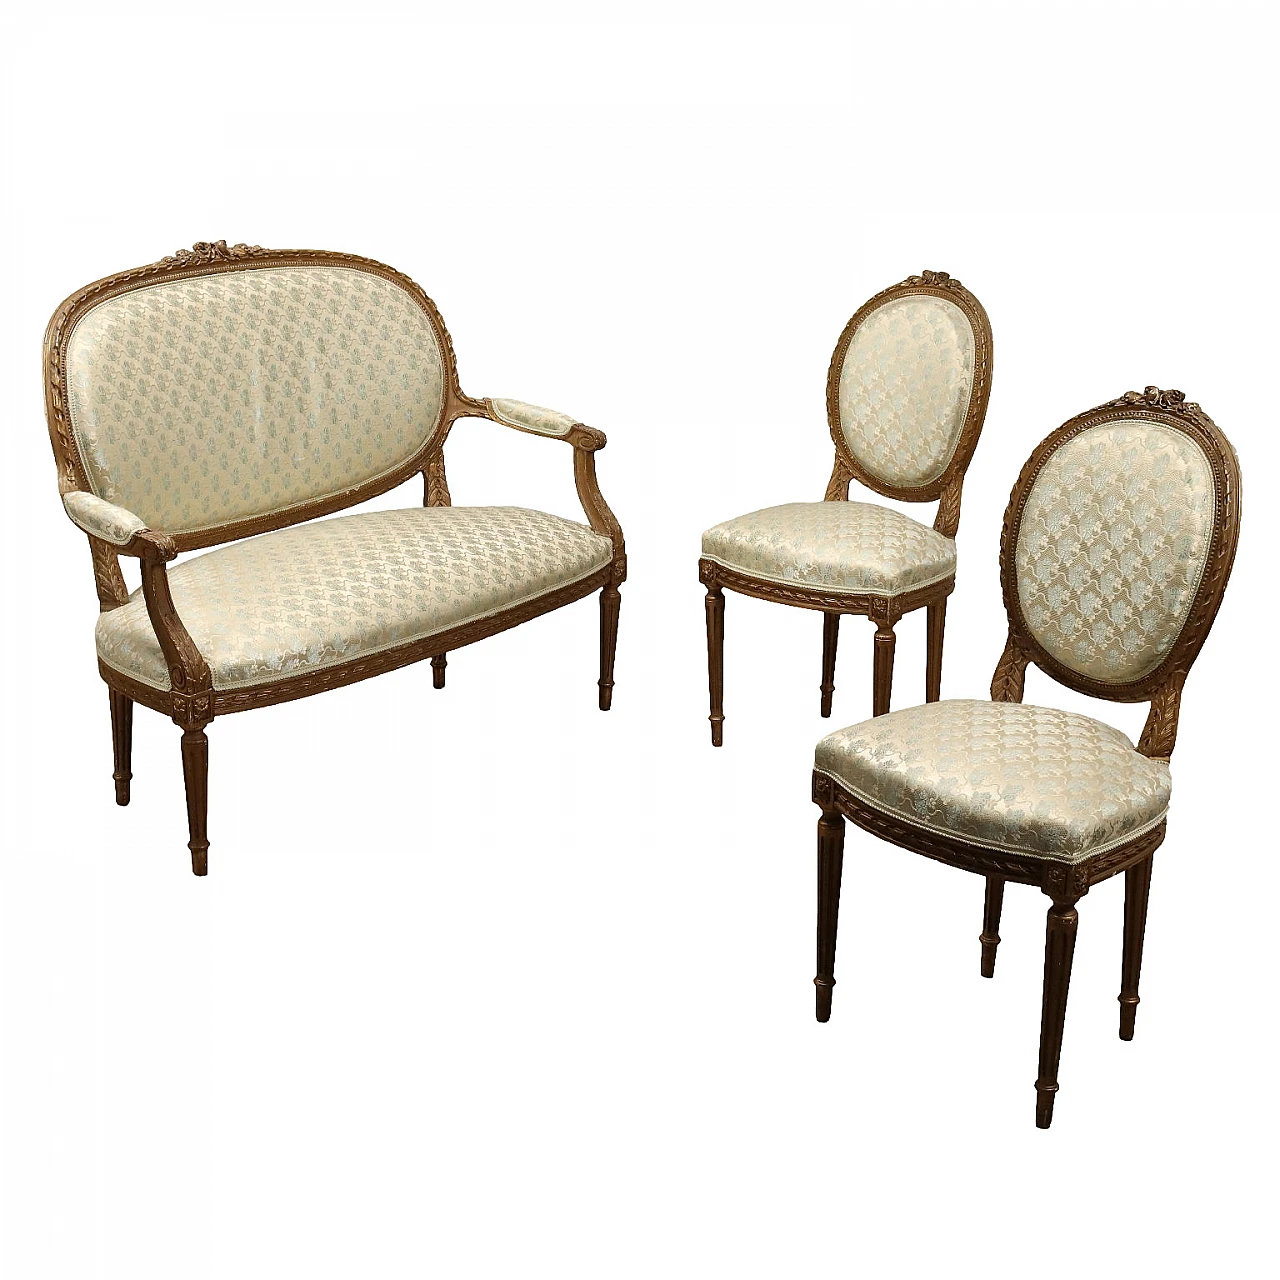 Pair of chairs and a sofa in carved & gilded wood, 19th century 1